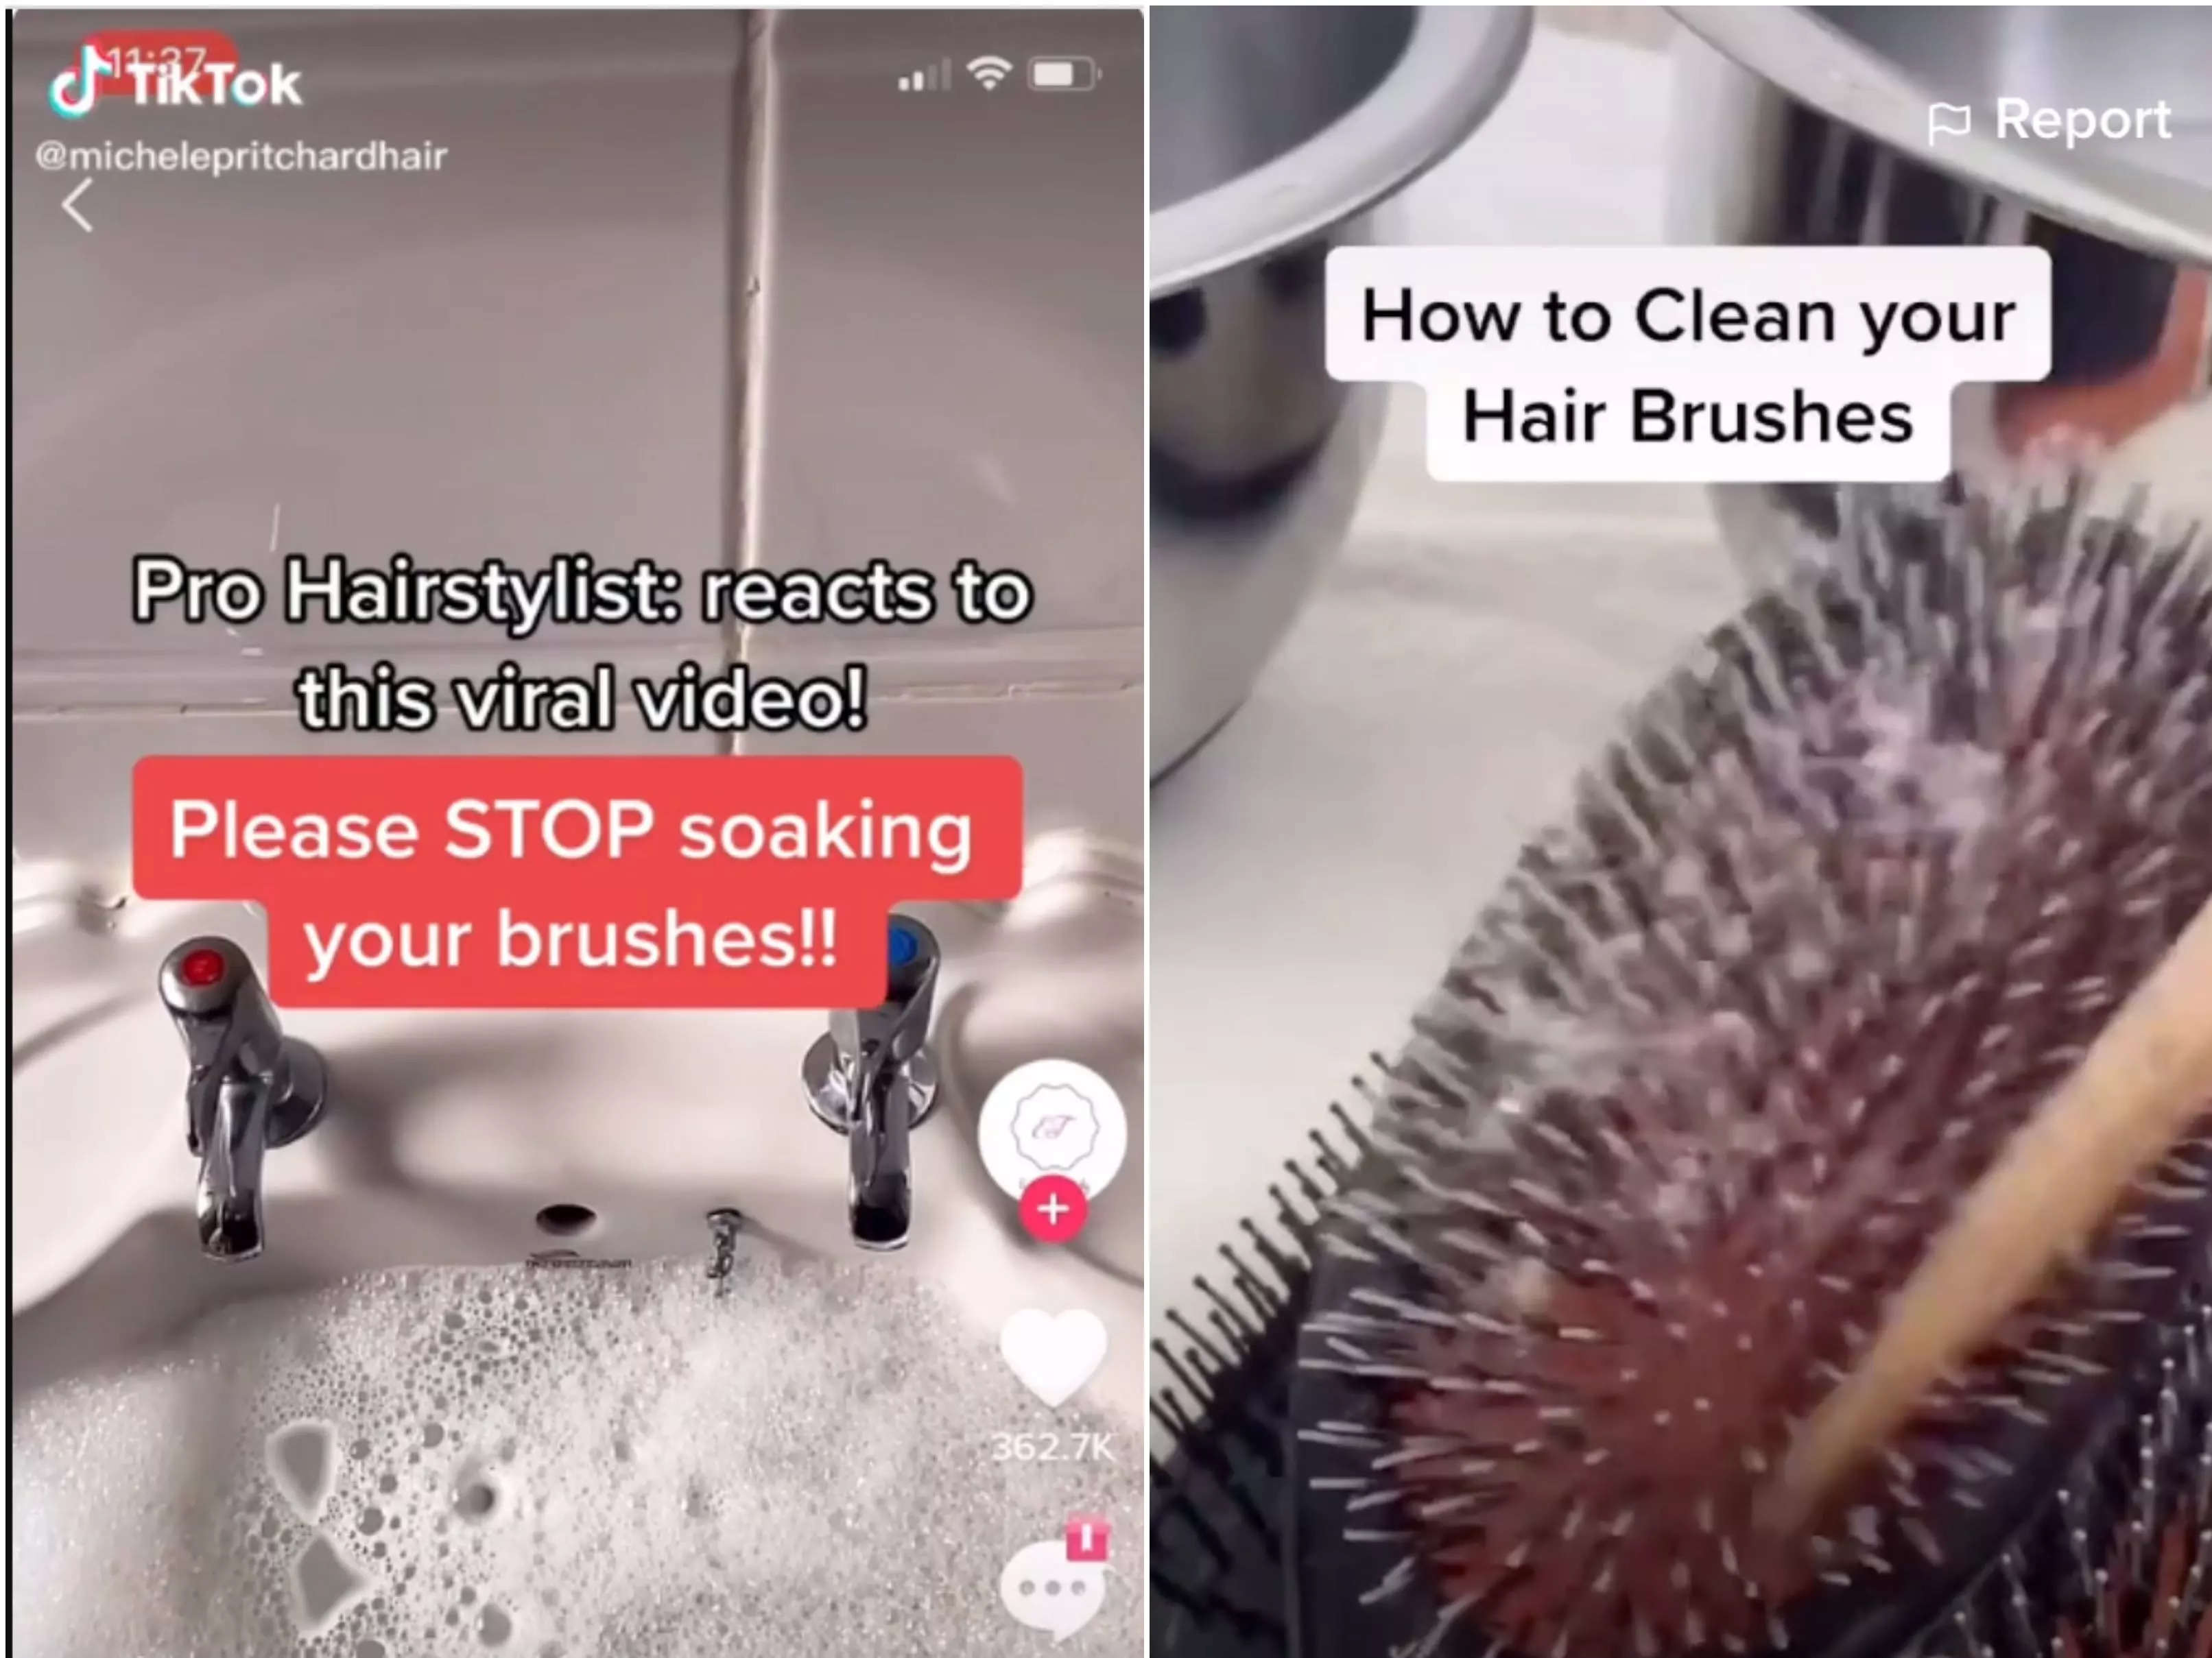 https://www.businessinsider.in/photo/88174451/a-viral-tiktok-showed-the-disgusting-results-of-a-dirty-hairbrush-which-can-be-a-breeding-ground-for-bacteria-and-build-up-according-to-experts.jpg?imgsize=168574